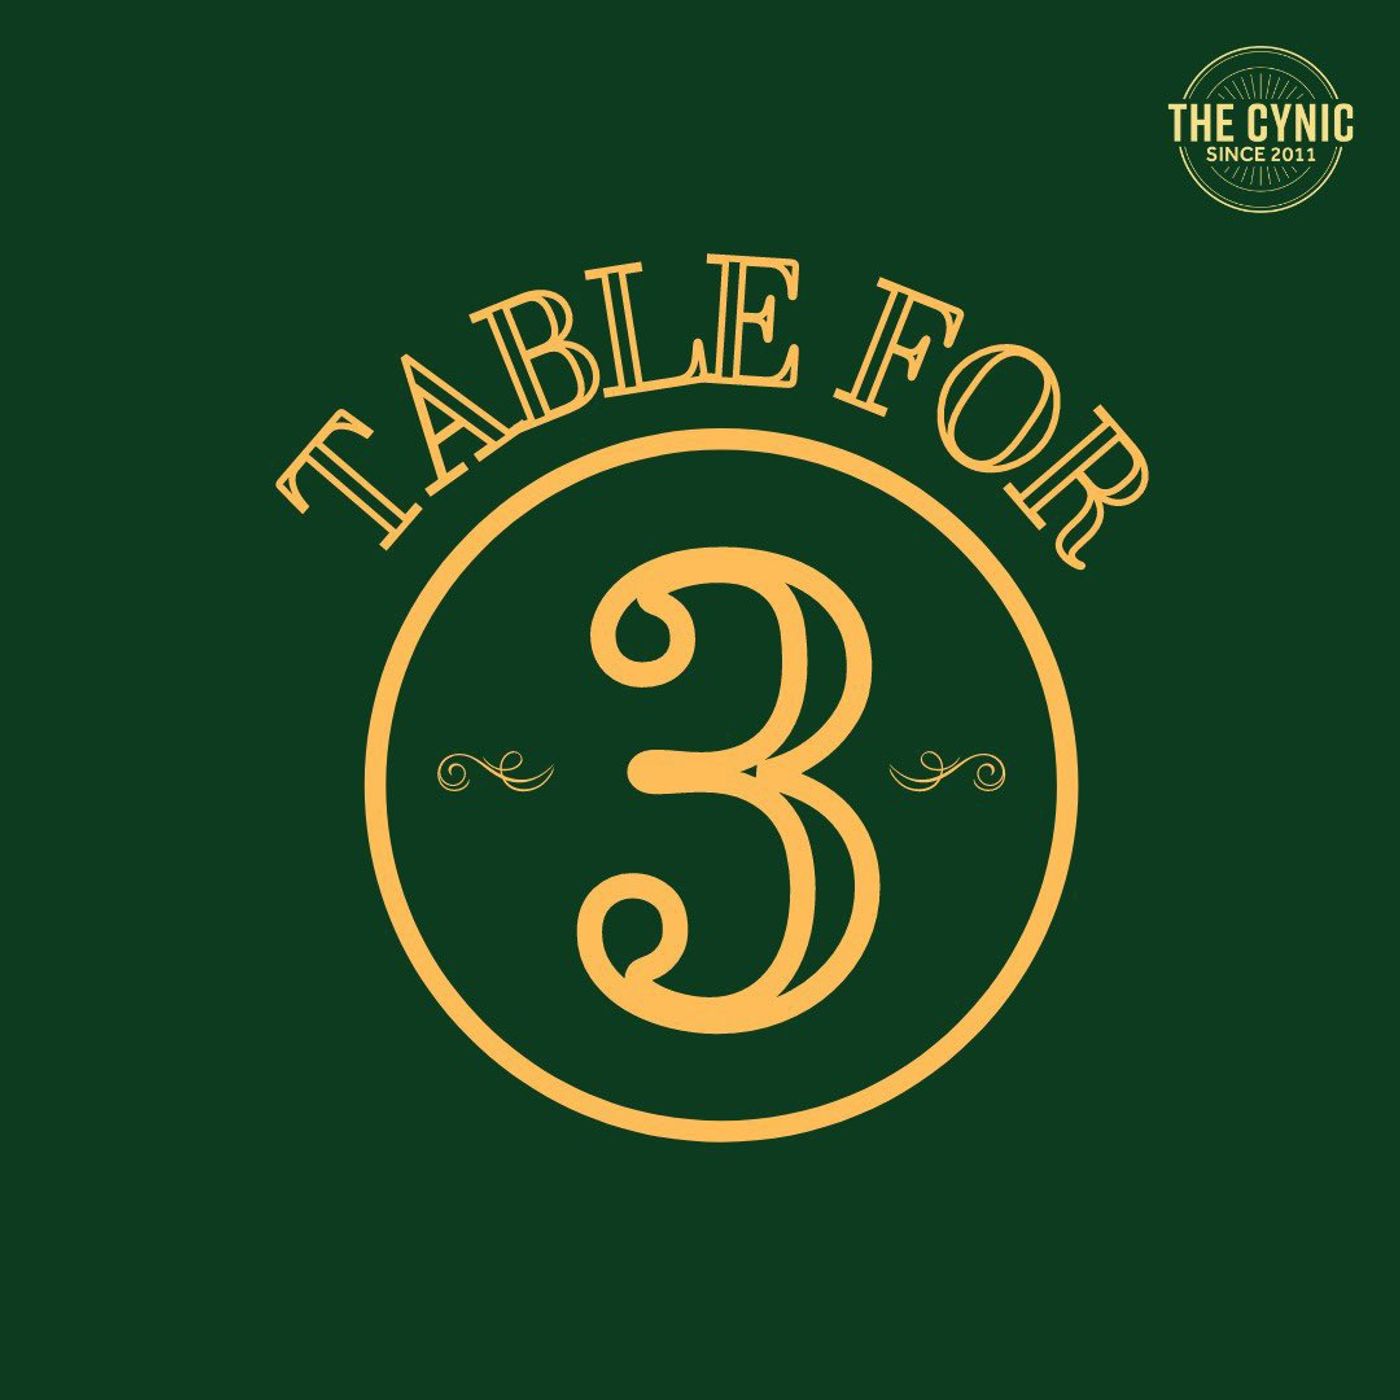 Table For Three – Old and New